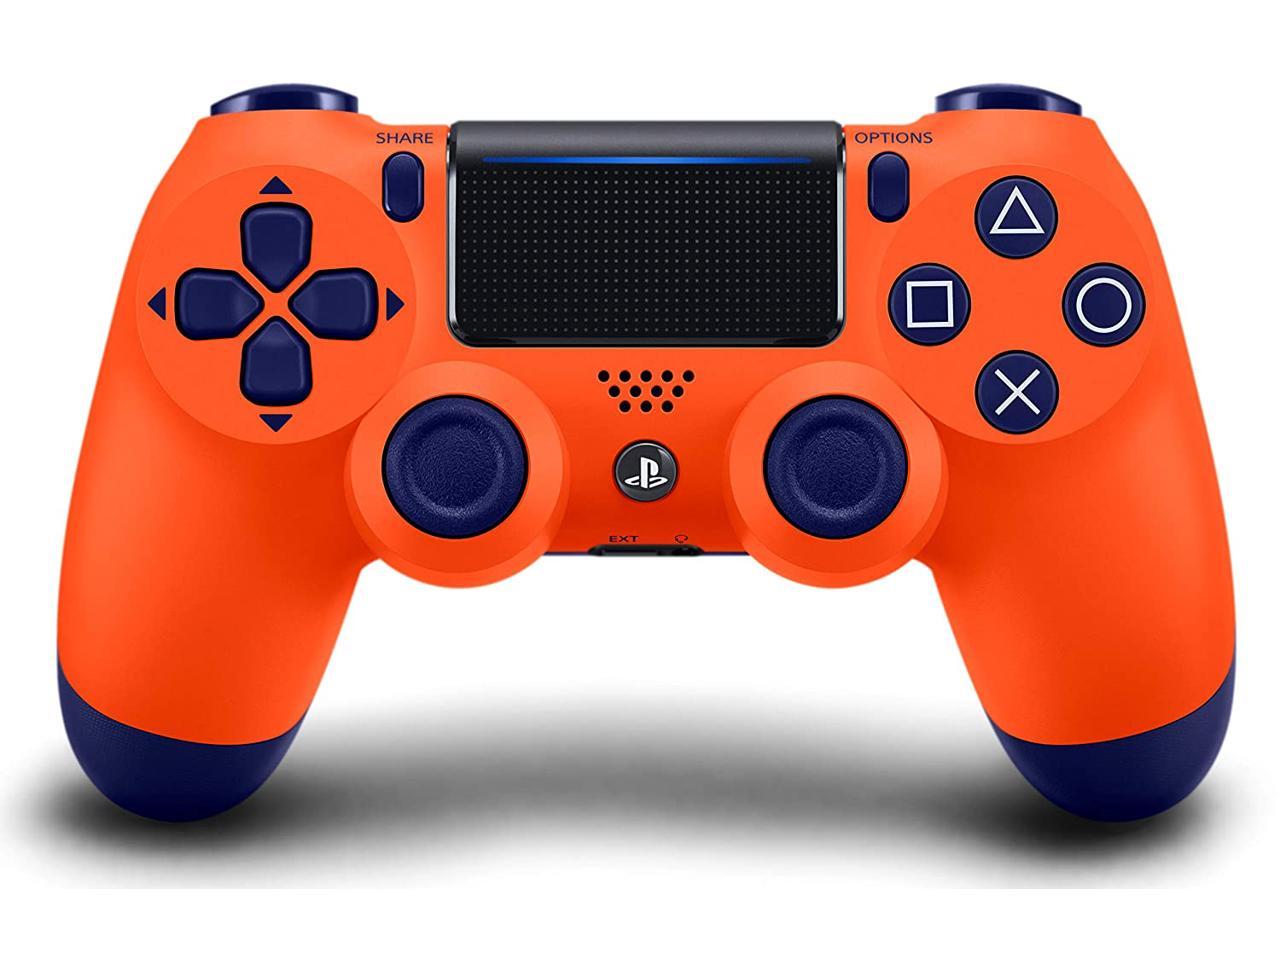 PS4 Wireless Controller Game Pad for SONY PlayStation 4 Dualshock - Sunset Orange,Hot PS4 Wireless Controller Game Pad for SONY PlayStation Dualshock 4 Camouflage